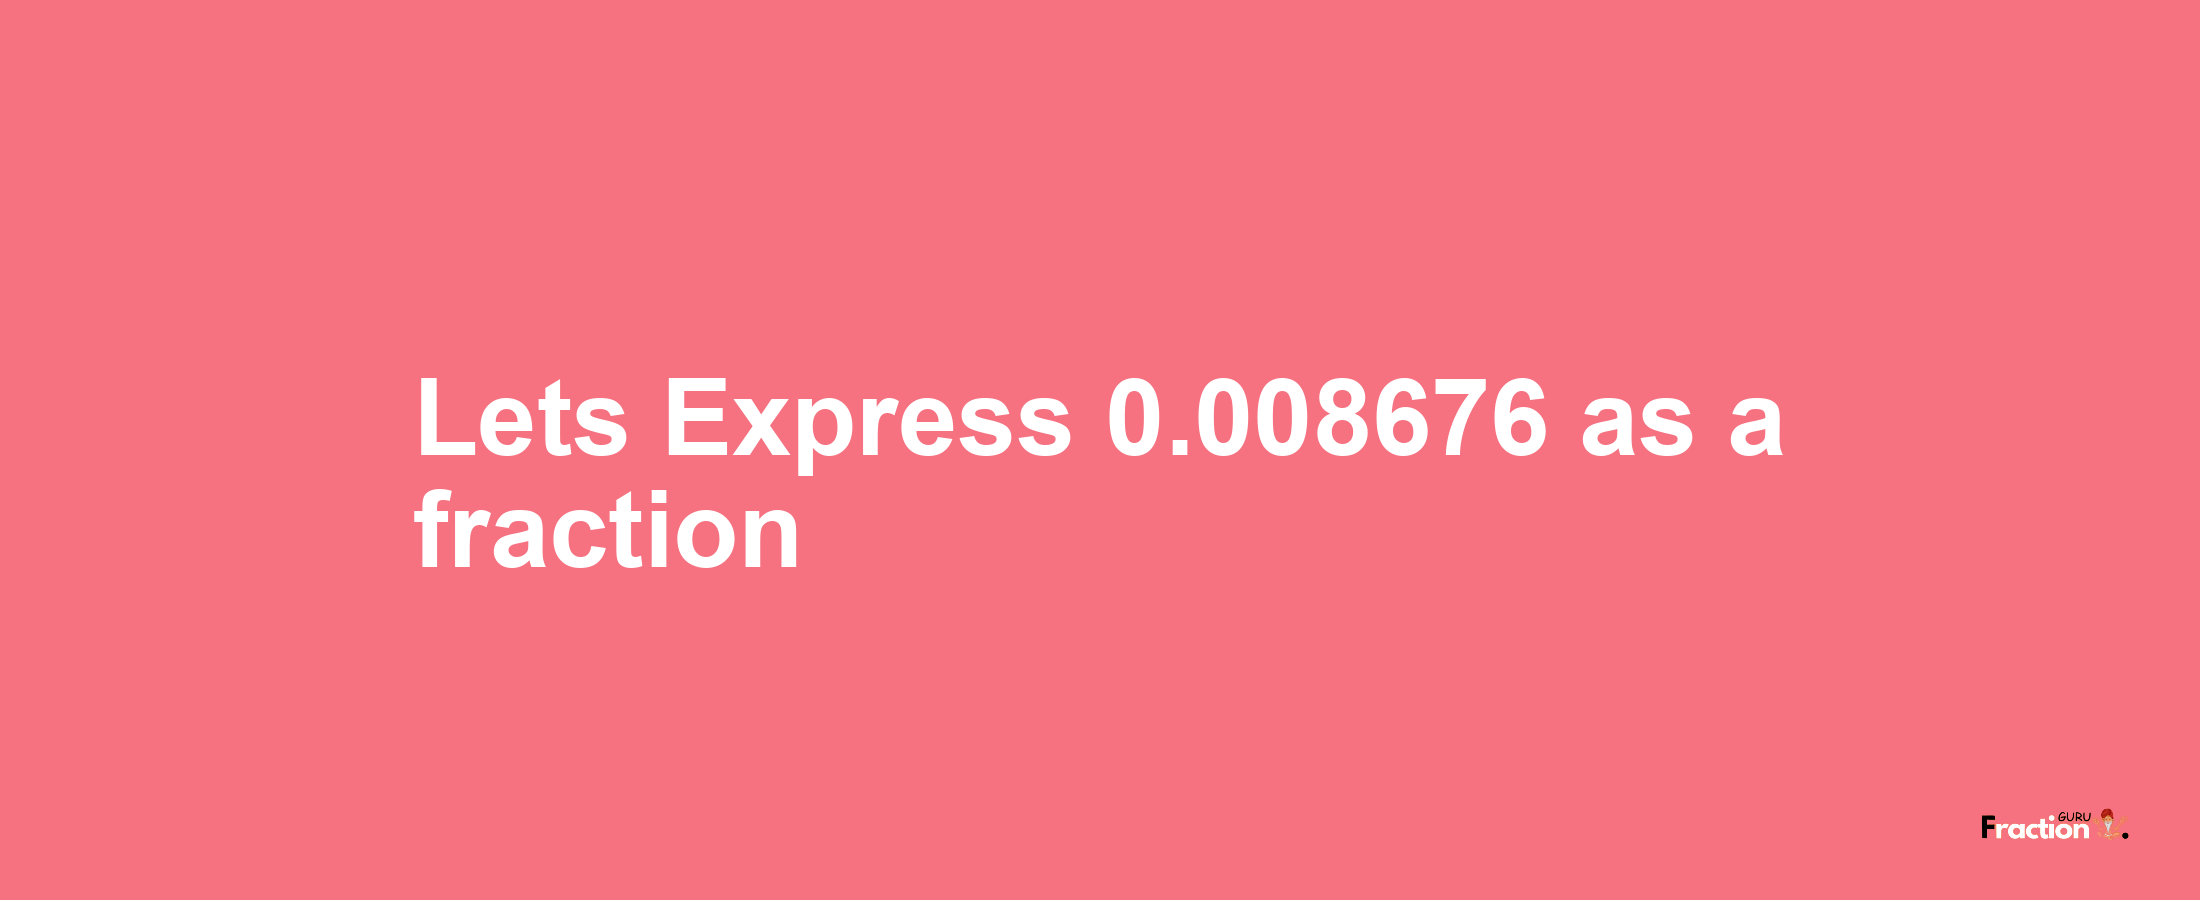 Lets Express 0.008676 as afraction